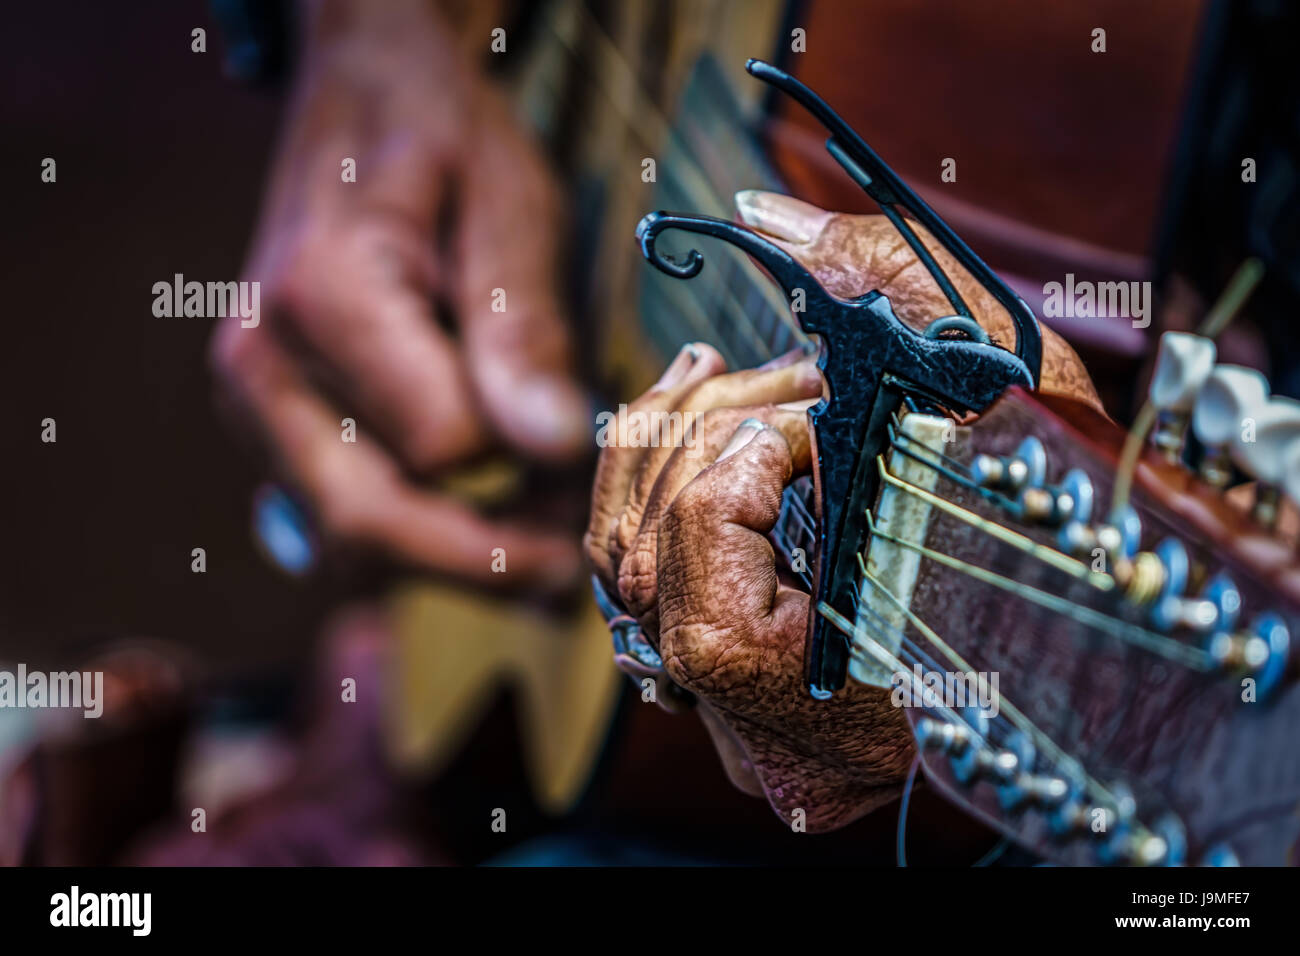 The rough hands of a street musician in southern California. Stock Photo